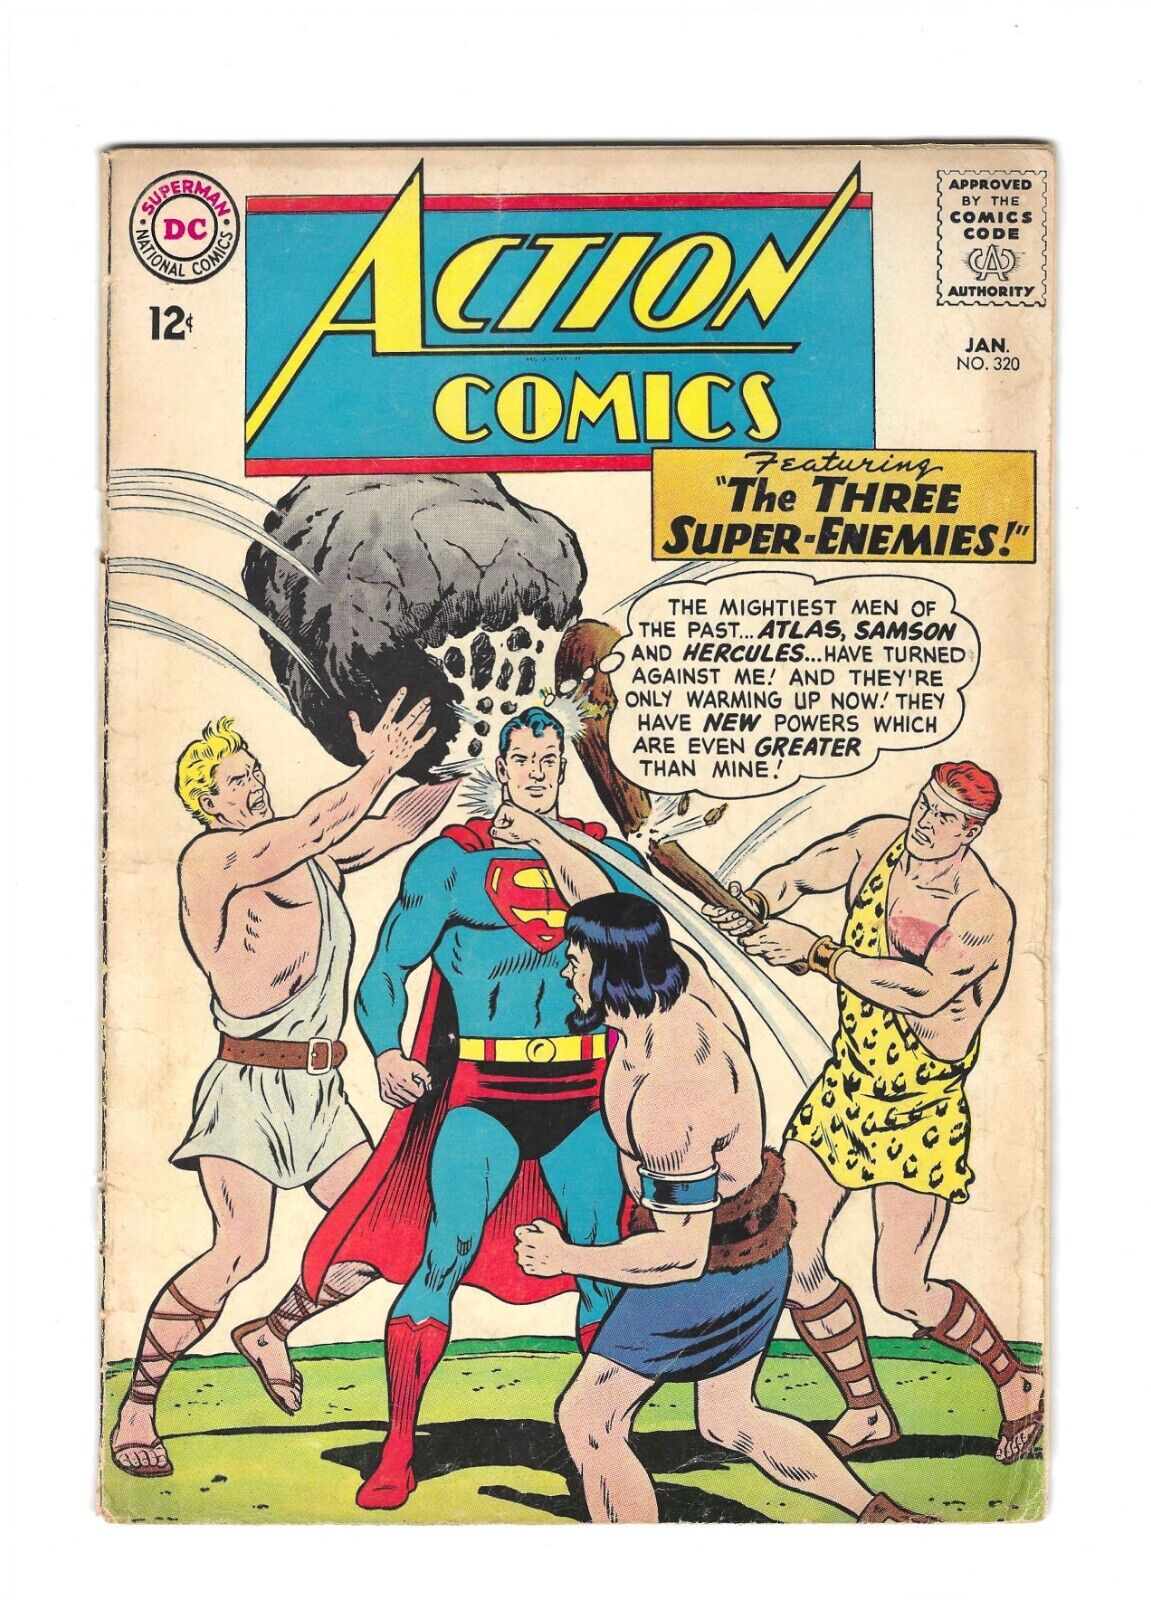 Action Comics #320: Dry Cleaned: Pressed: Scanned: Bagged & Boarded GD 2.0